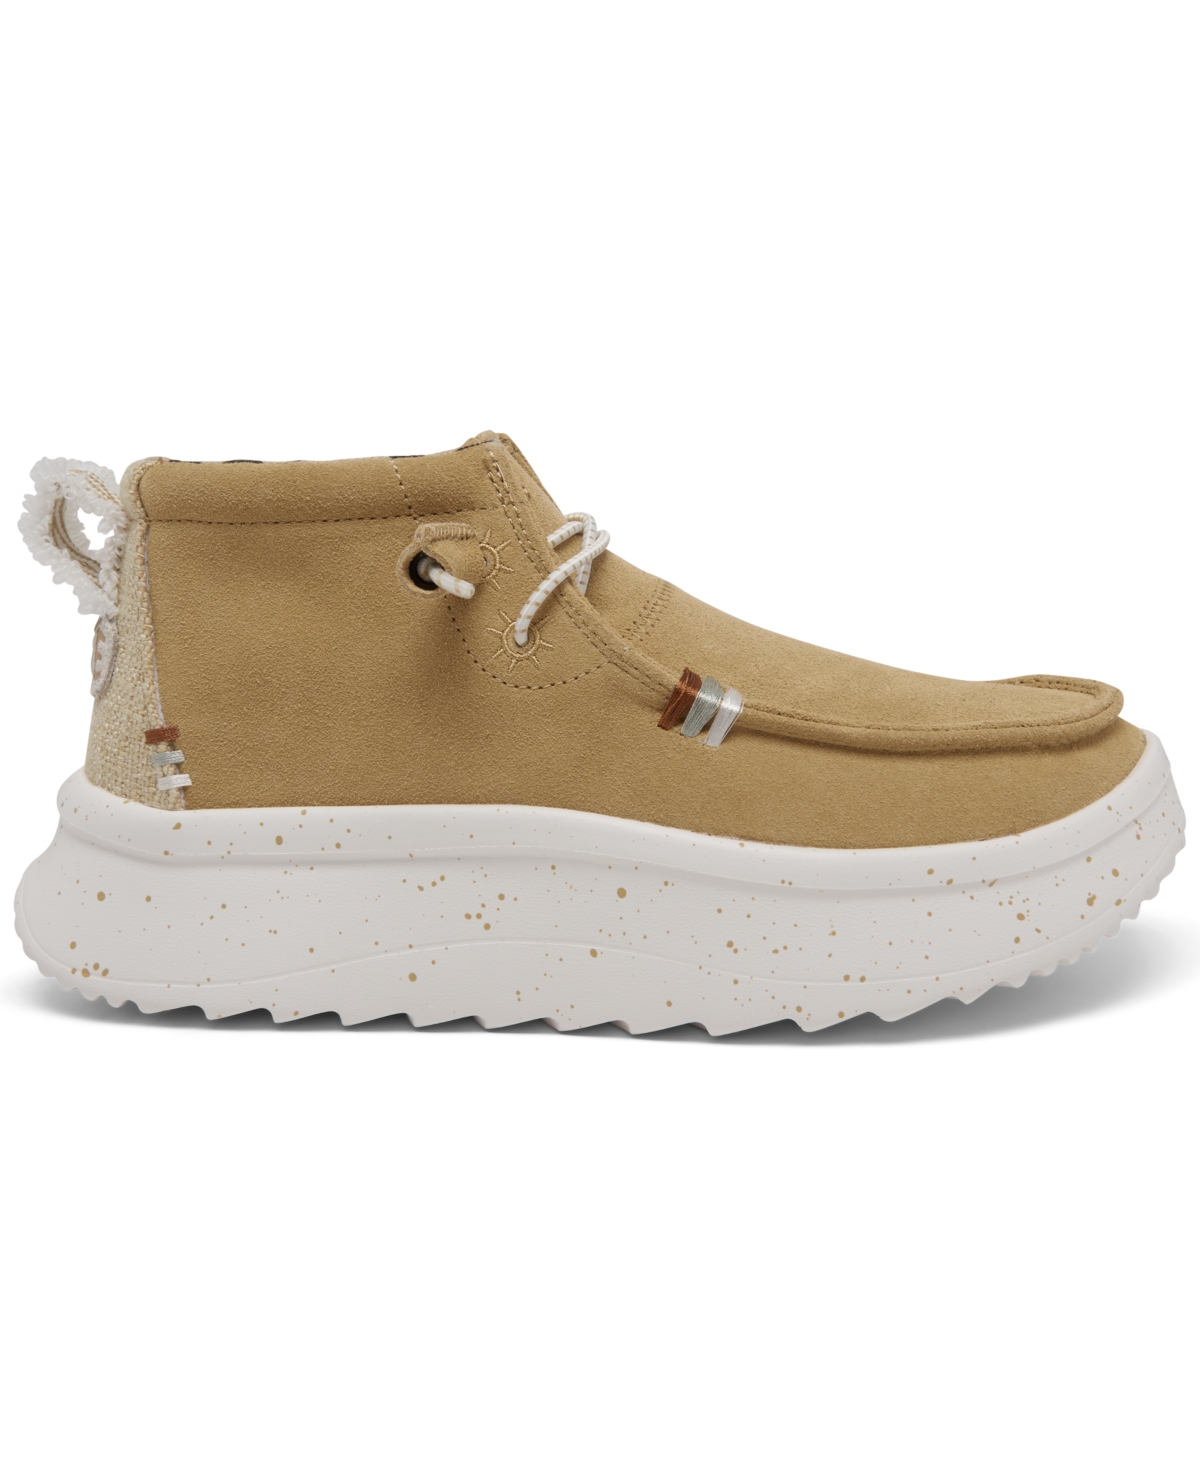 Shop Hey Dude Women's Wendy Peak Hi Suede Casual Moccasin Sneakers From Finish Line In Tan